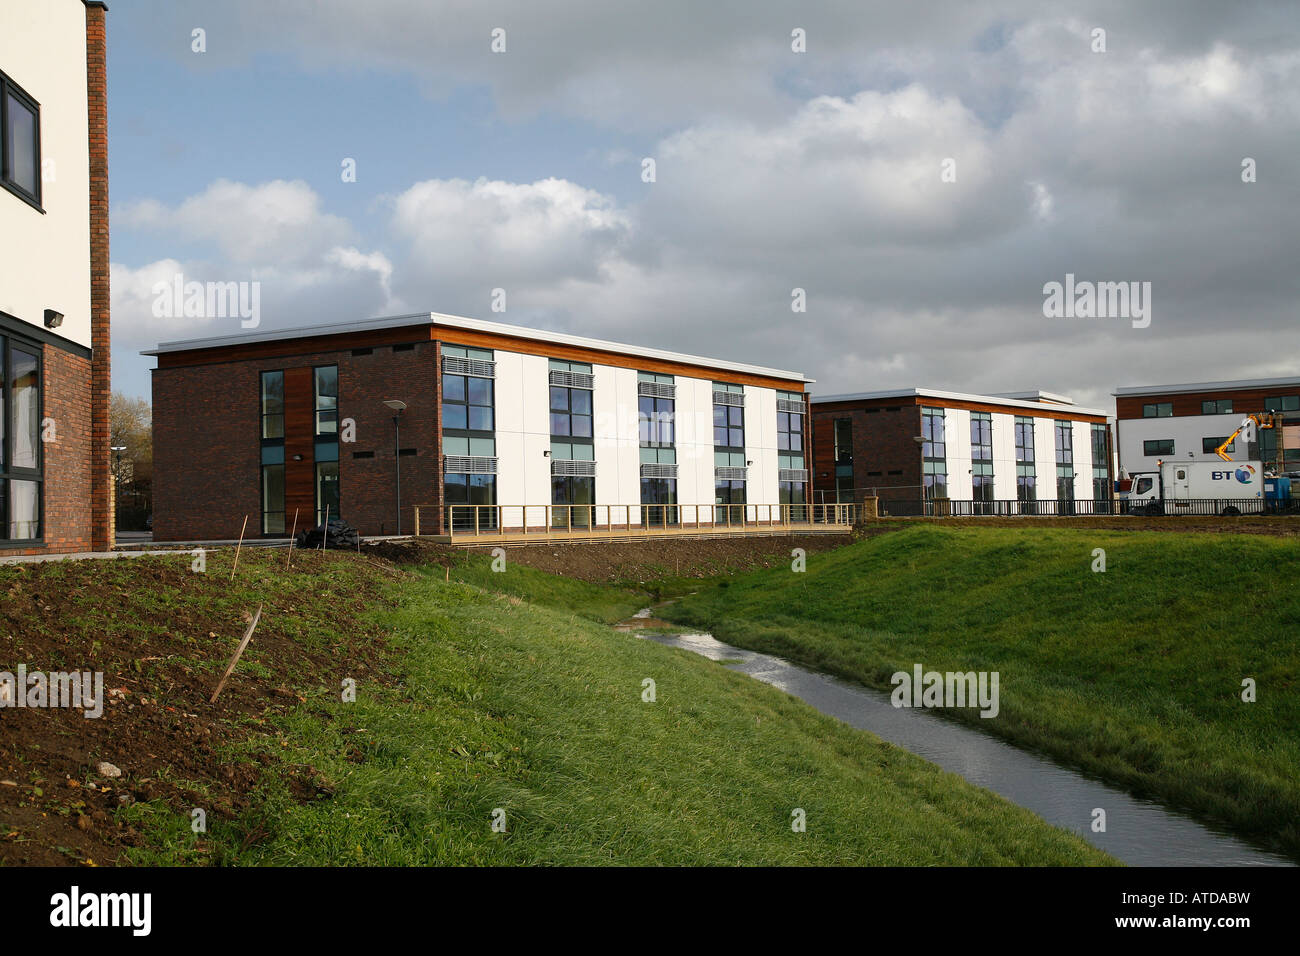 Exterior of 2 storey office buildings in a modern Business Park Stock Photo